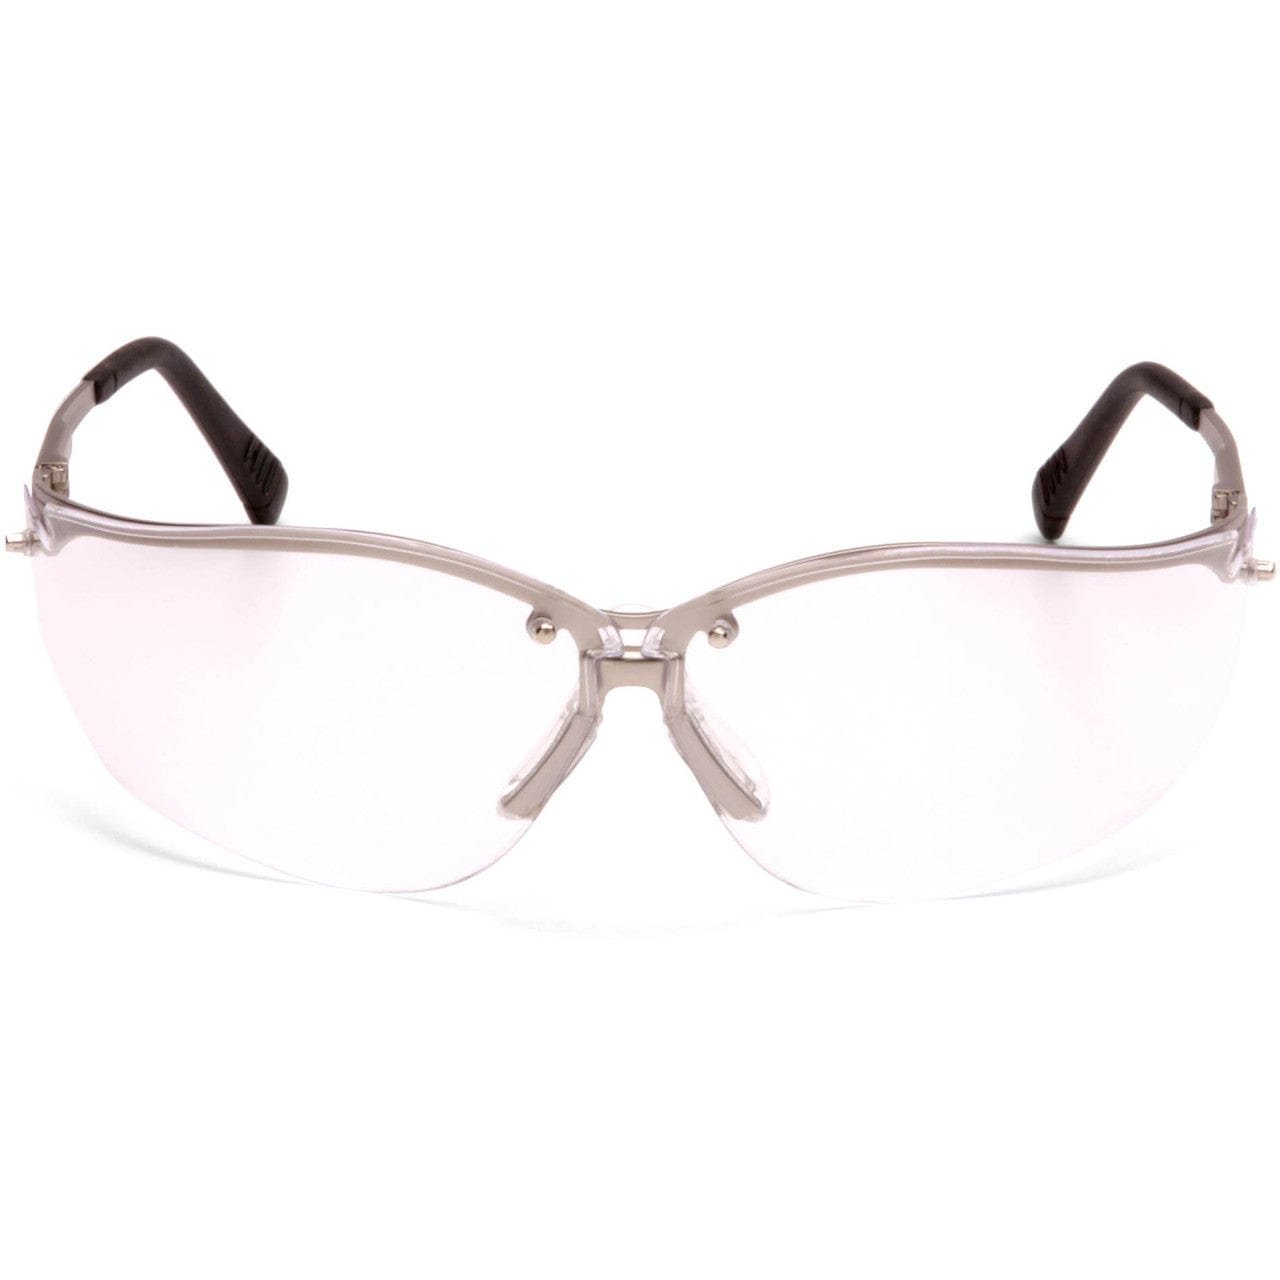 Pyramex V2 Metal Safety Glasses with Clear Lens SGM1810S Front